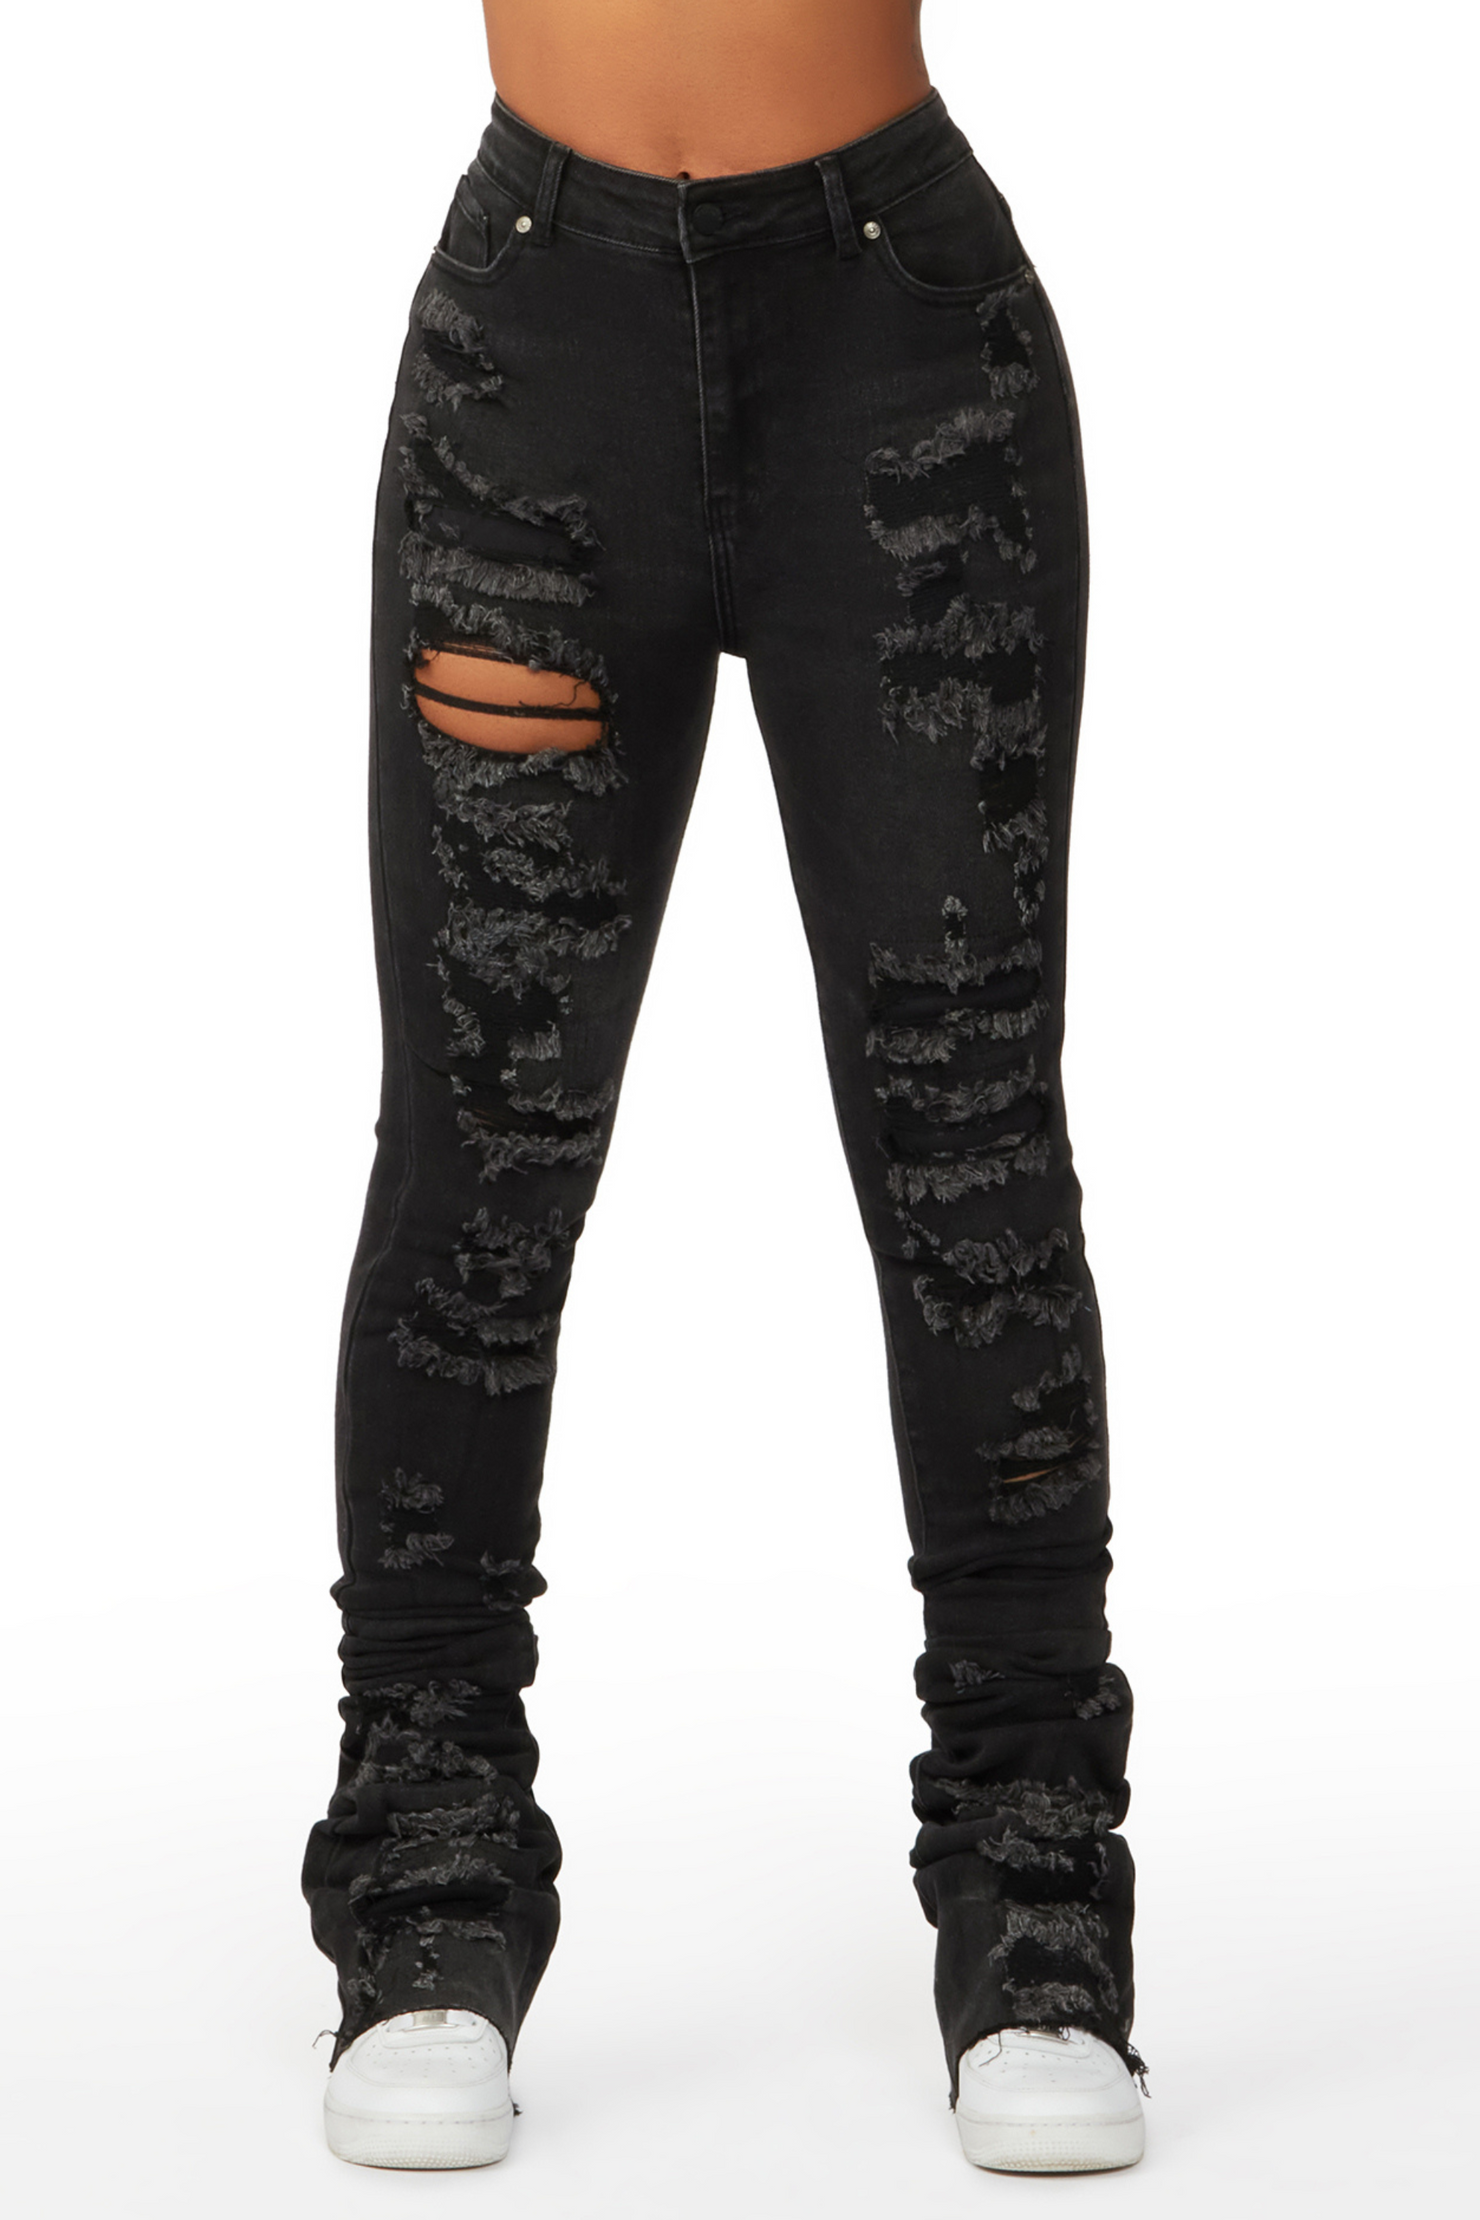 Your Loss Black Distressed Super Stacked Jean